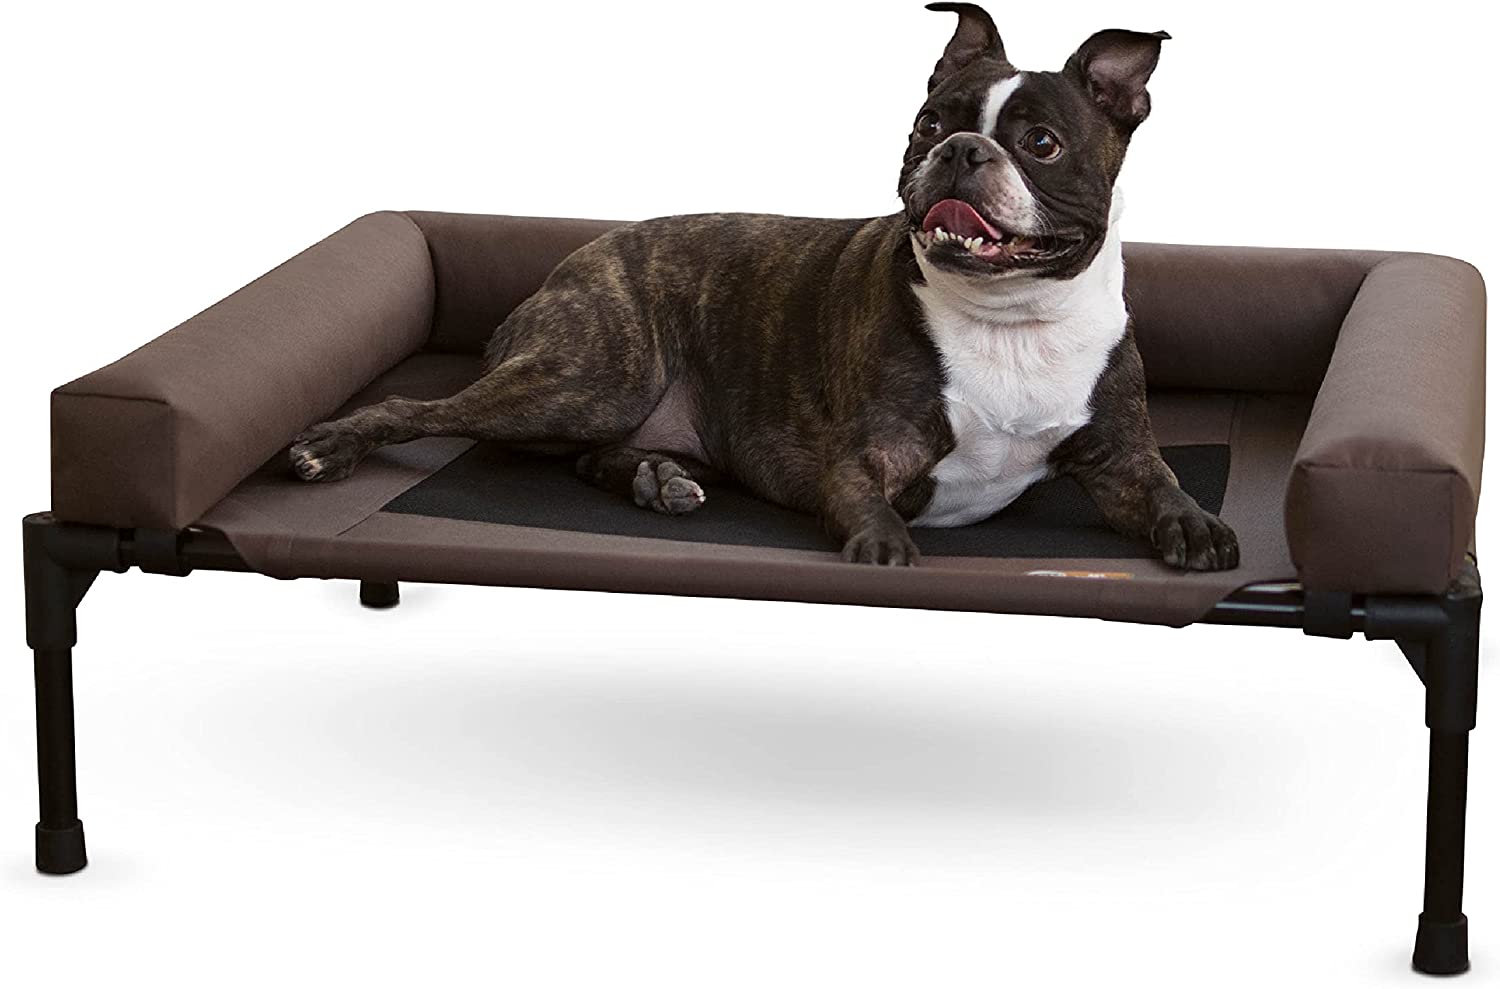 7. K&H Pet Products Bolster Dog Bed